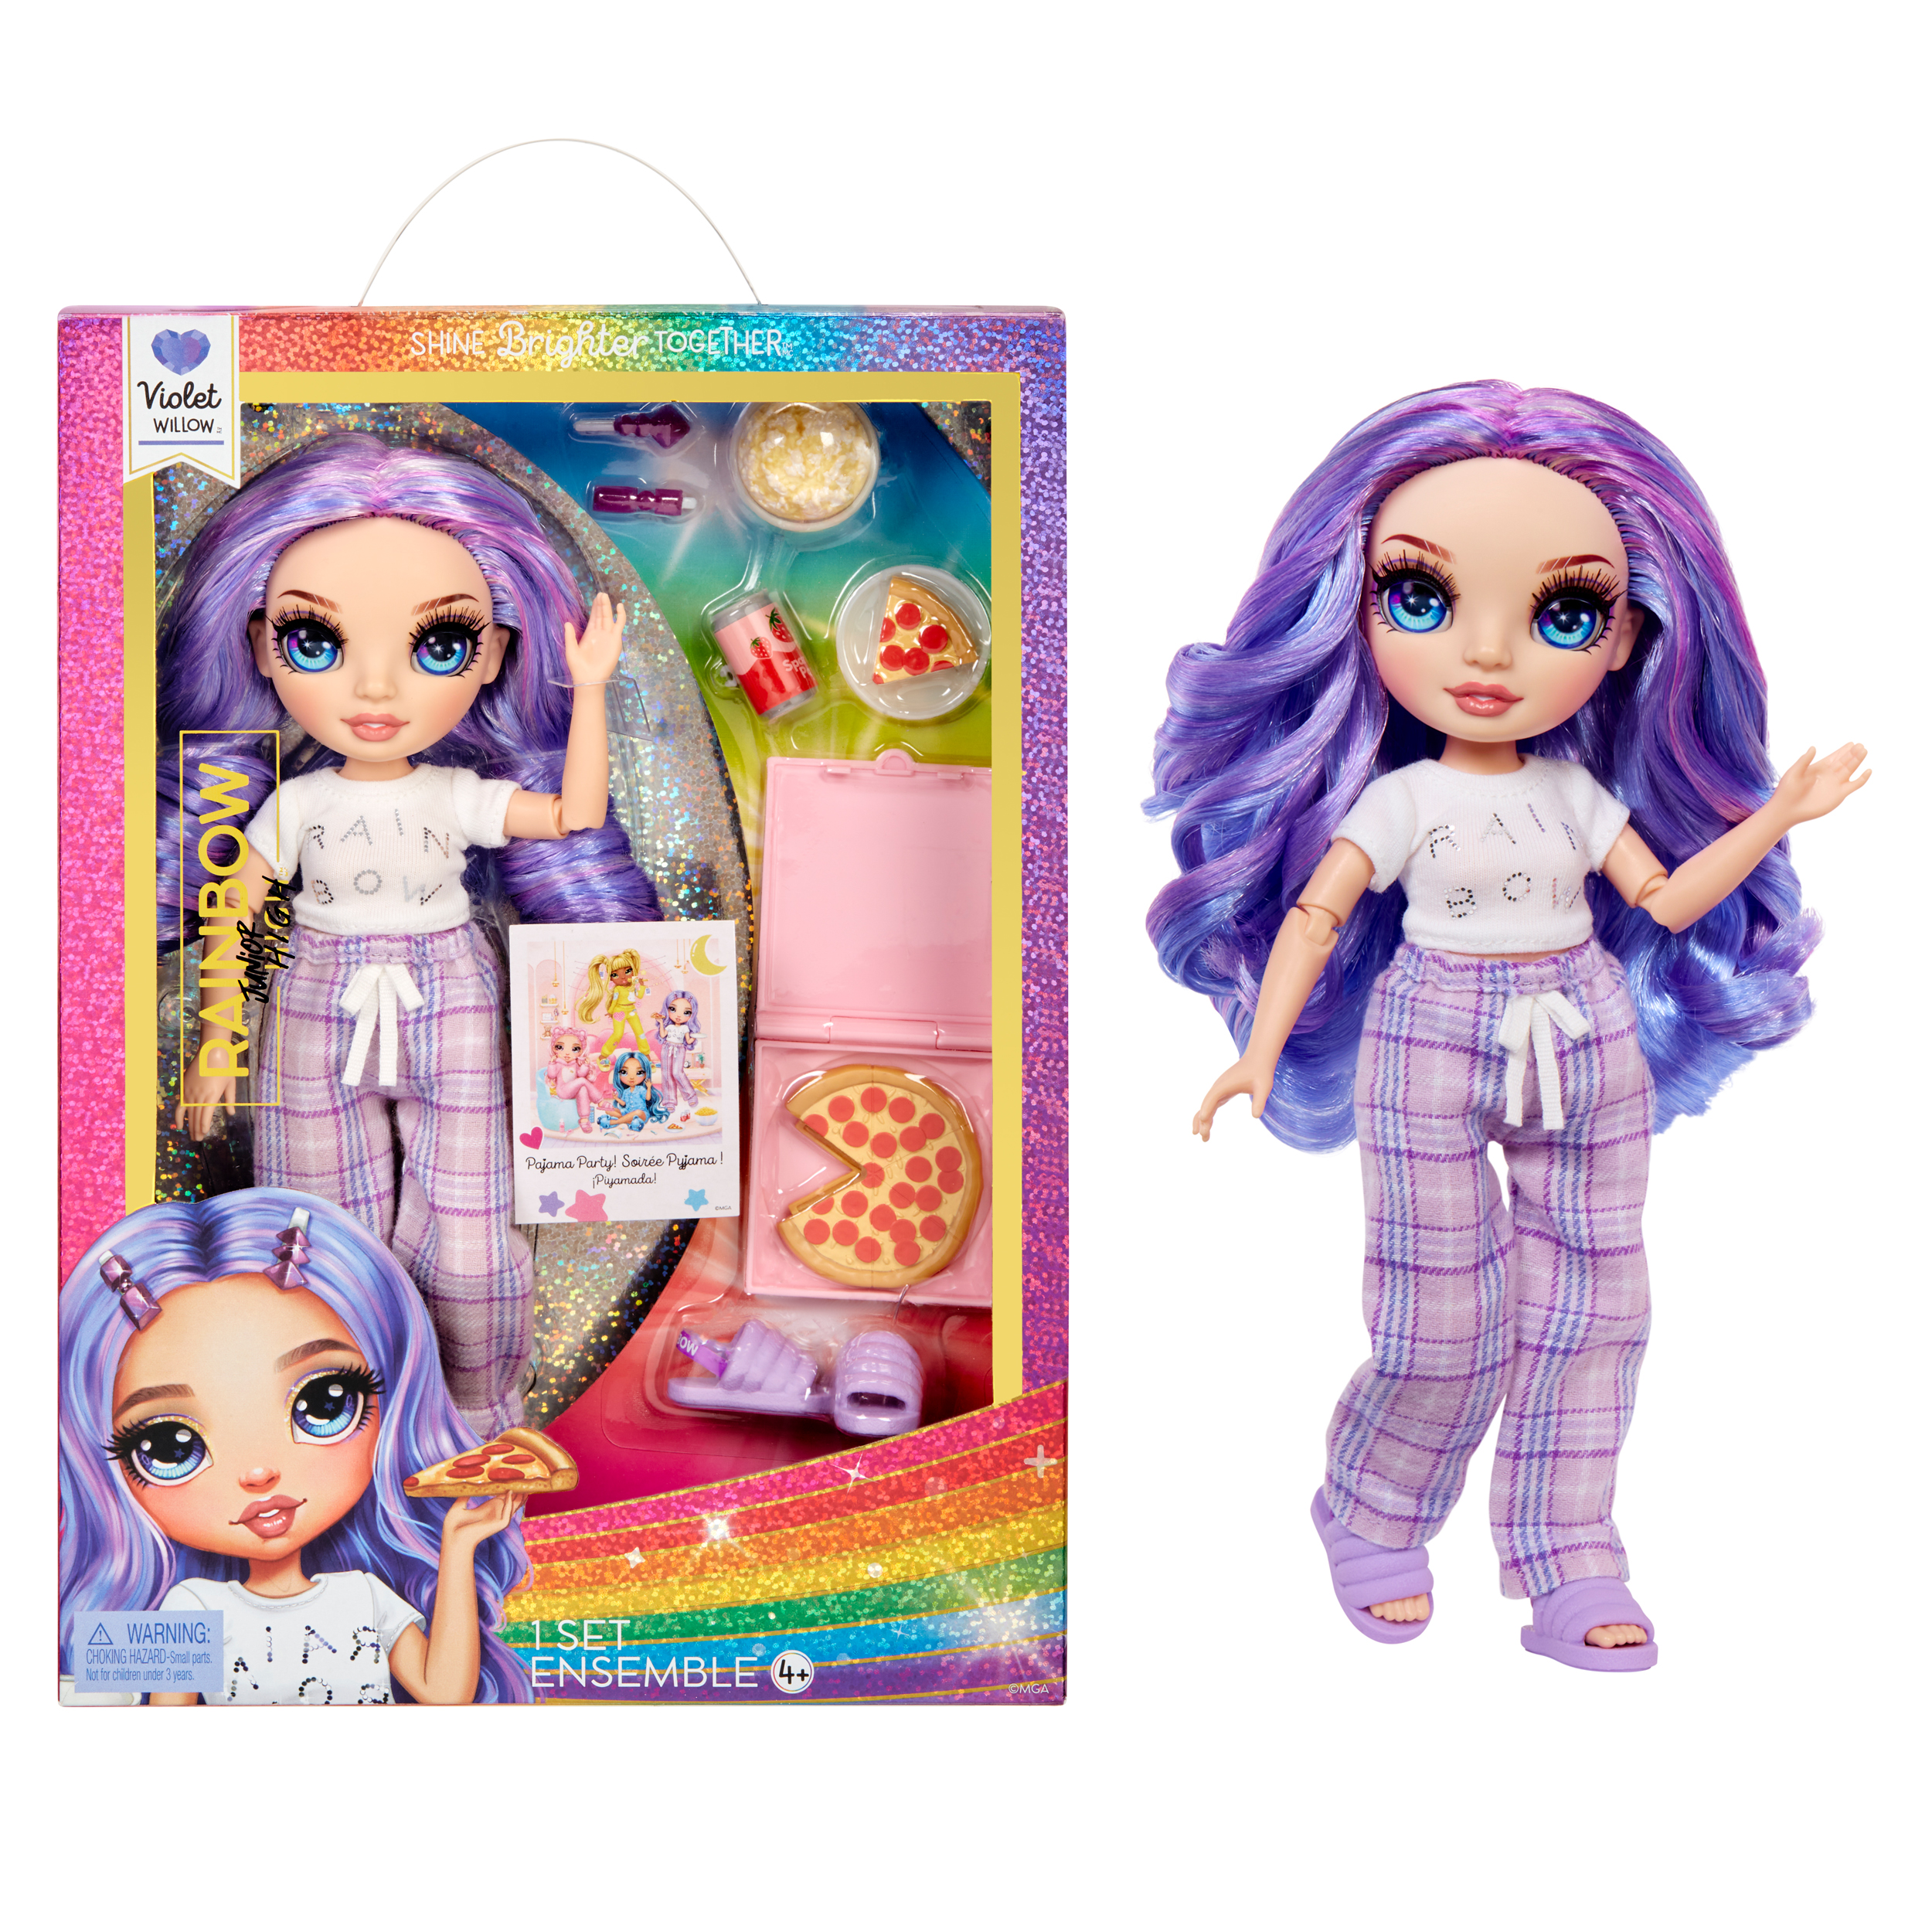 Rainbow High Jr High PJ Party Violet, Purple 9” Posable Doll, Soft Onesie, Slippers, Play Accessories, Kids Toy Ages 4-12 - image 1 of 8